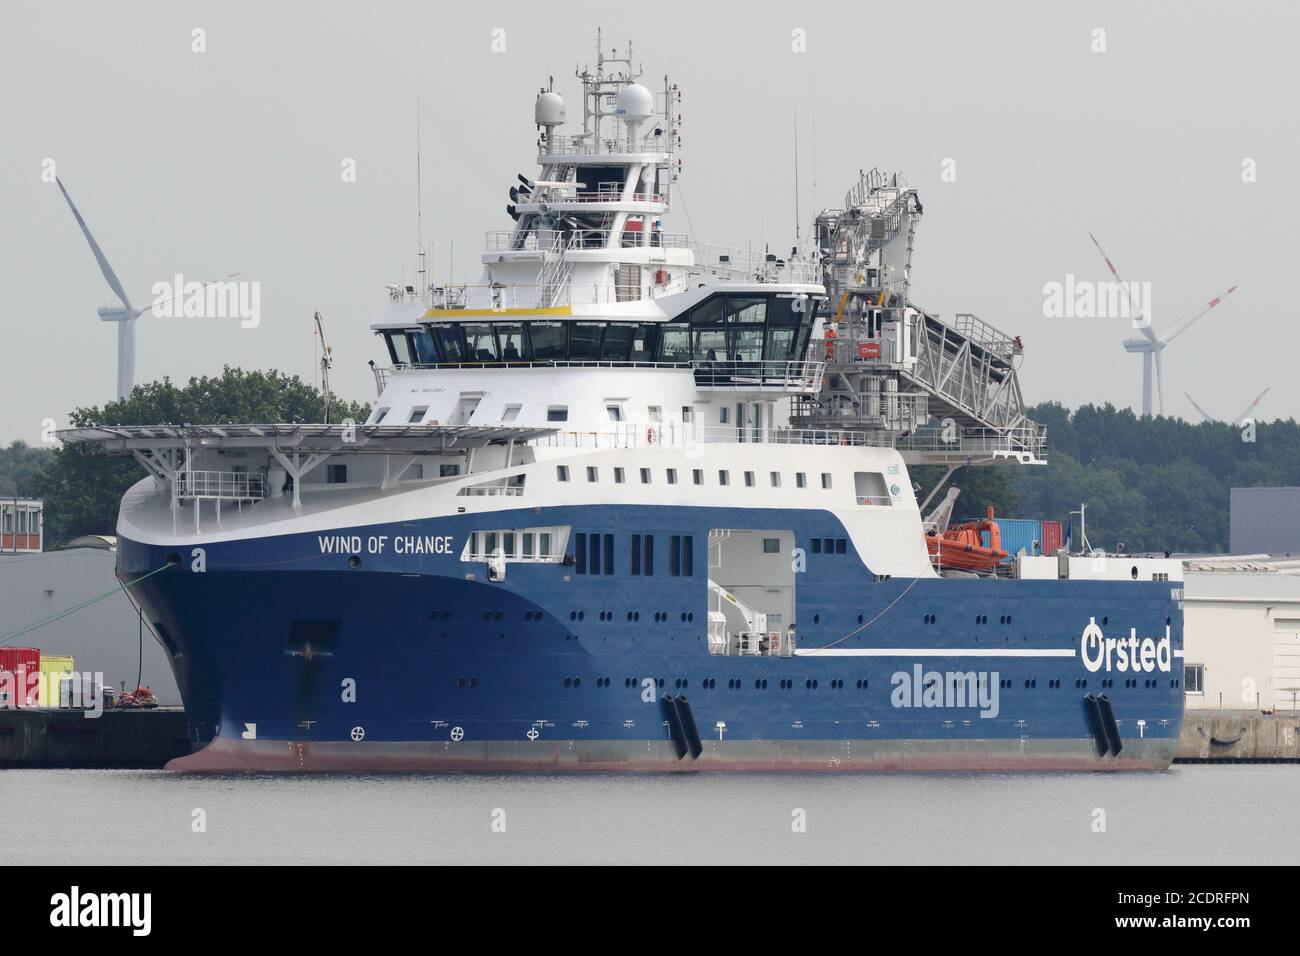 The offshore supply ship Wind of Change will be in the port of Emden on August 1, 2020. Stock Photo